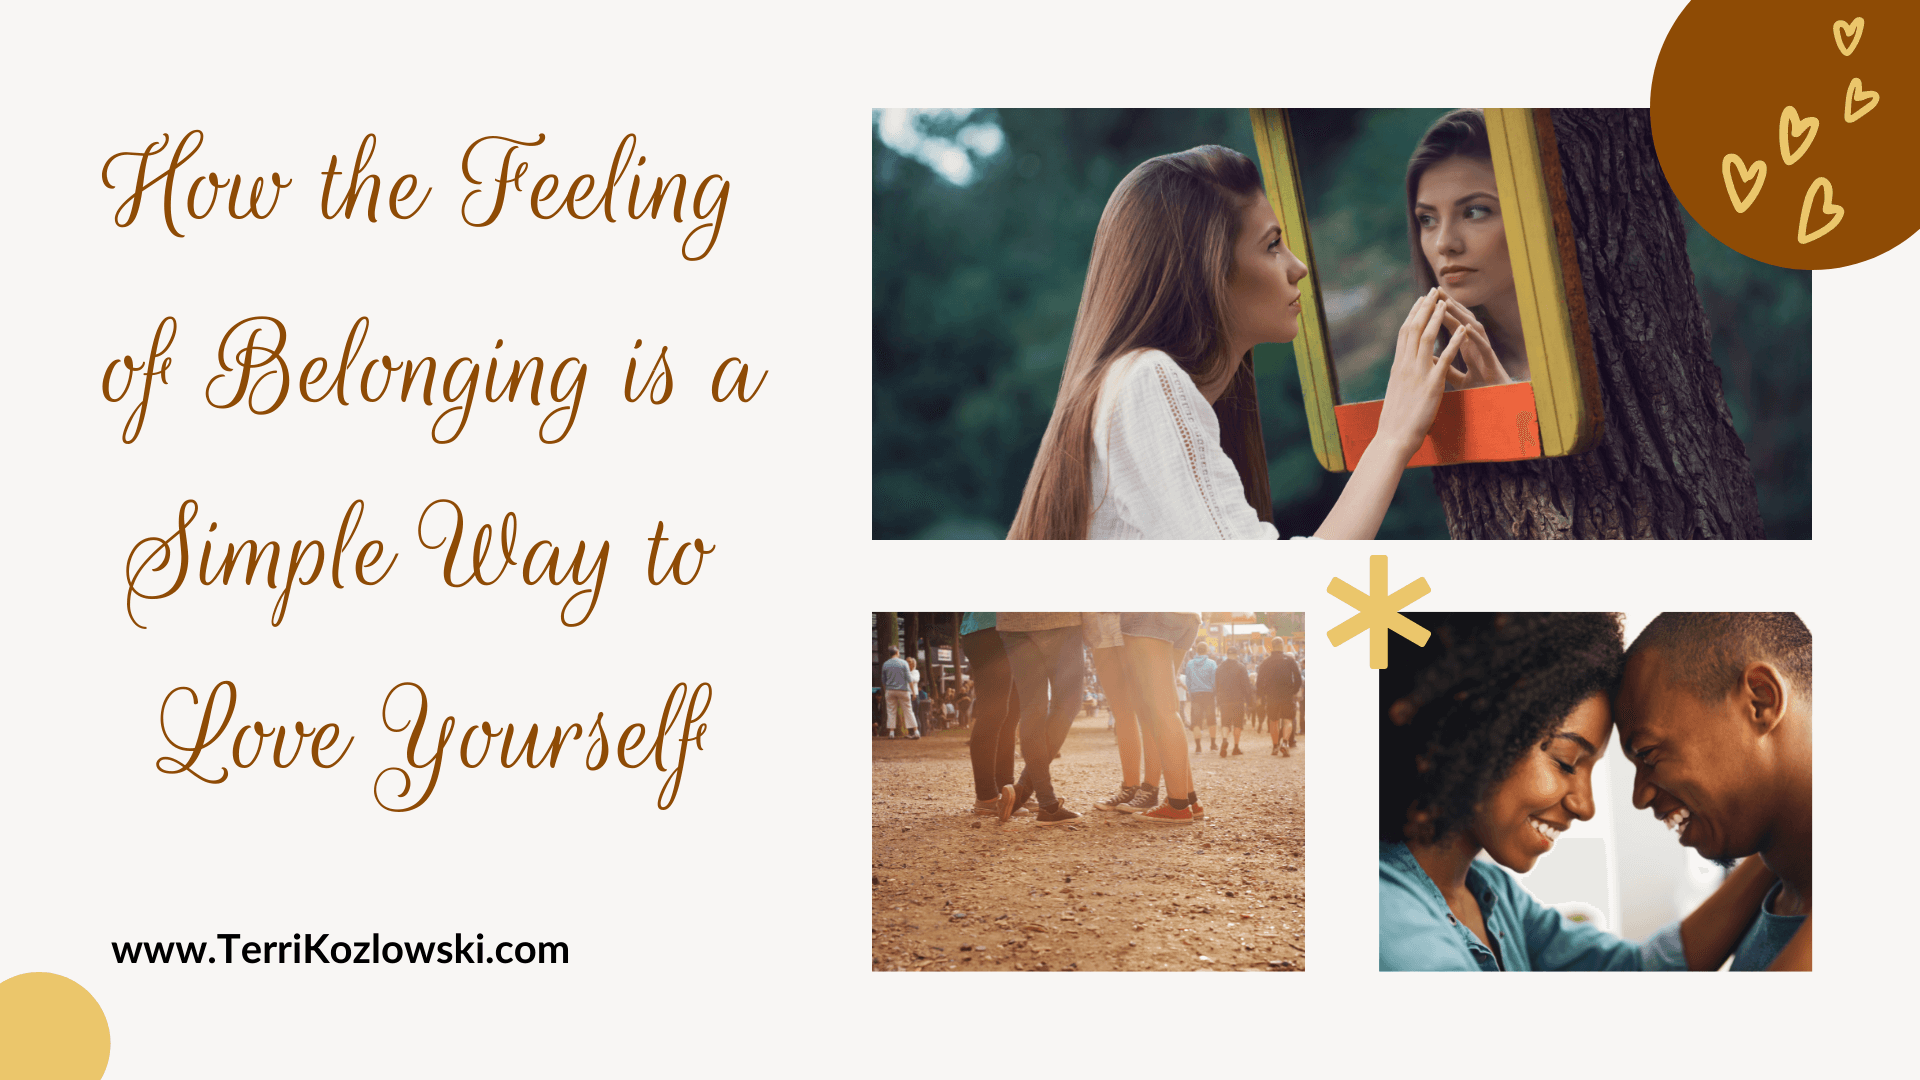 Belonging is an act of self-care